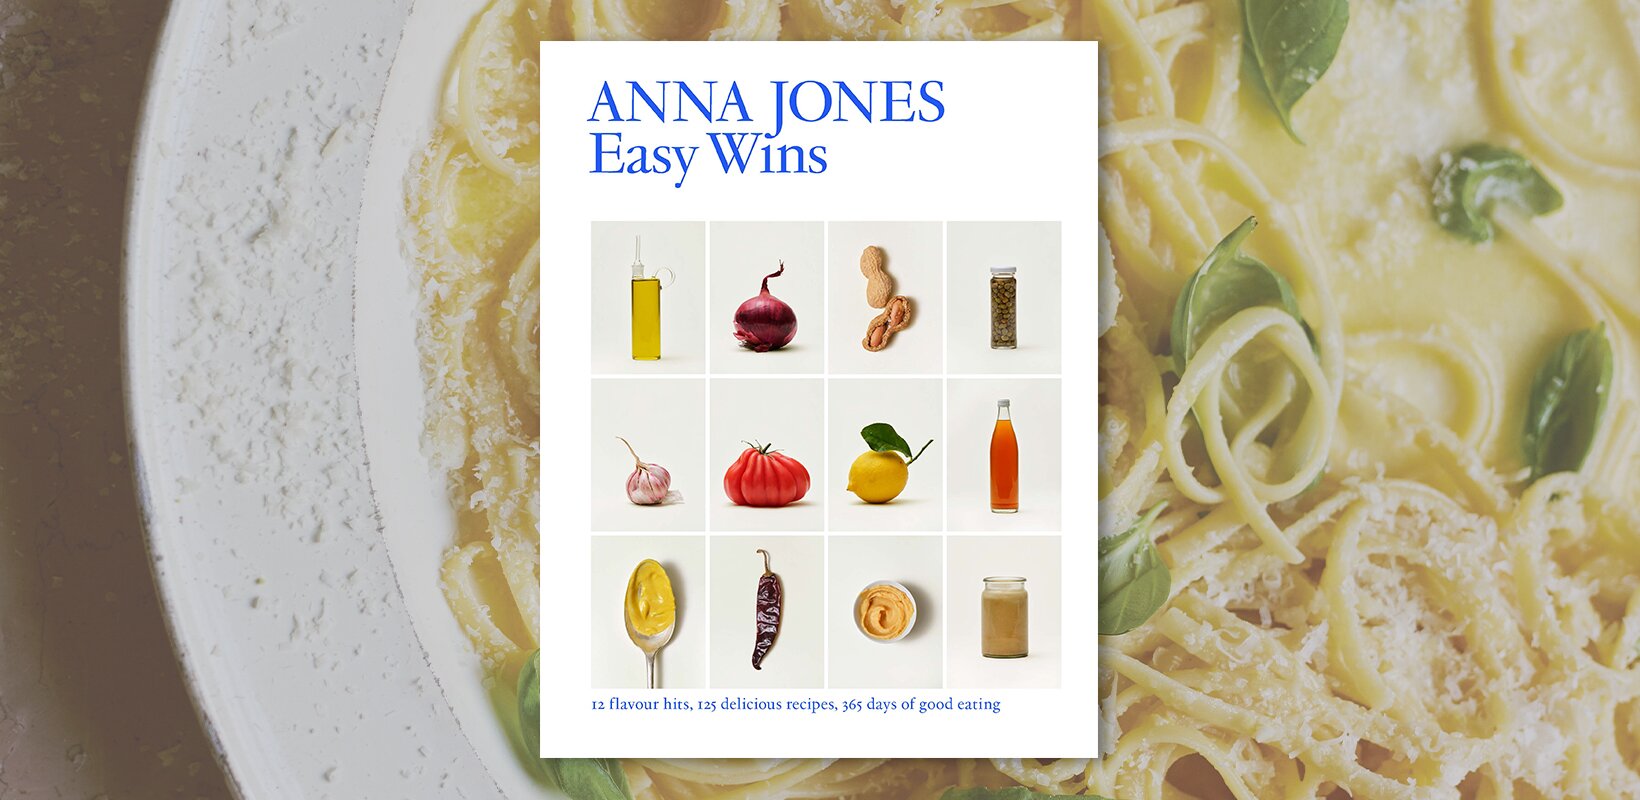 Book review: Easy Wins by Anna Jones